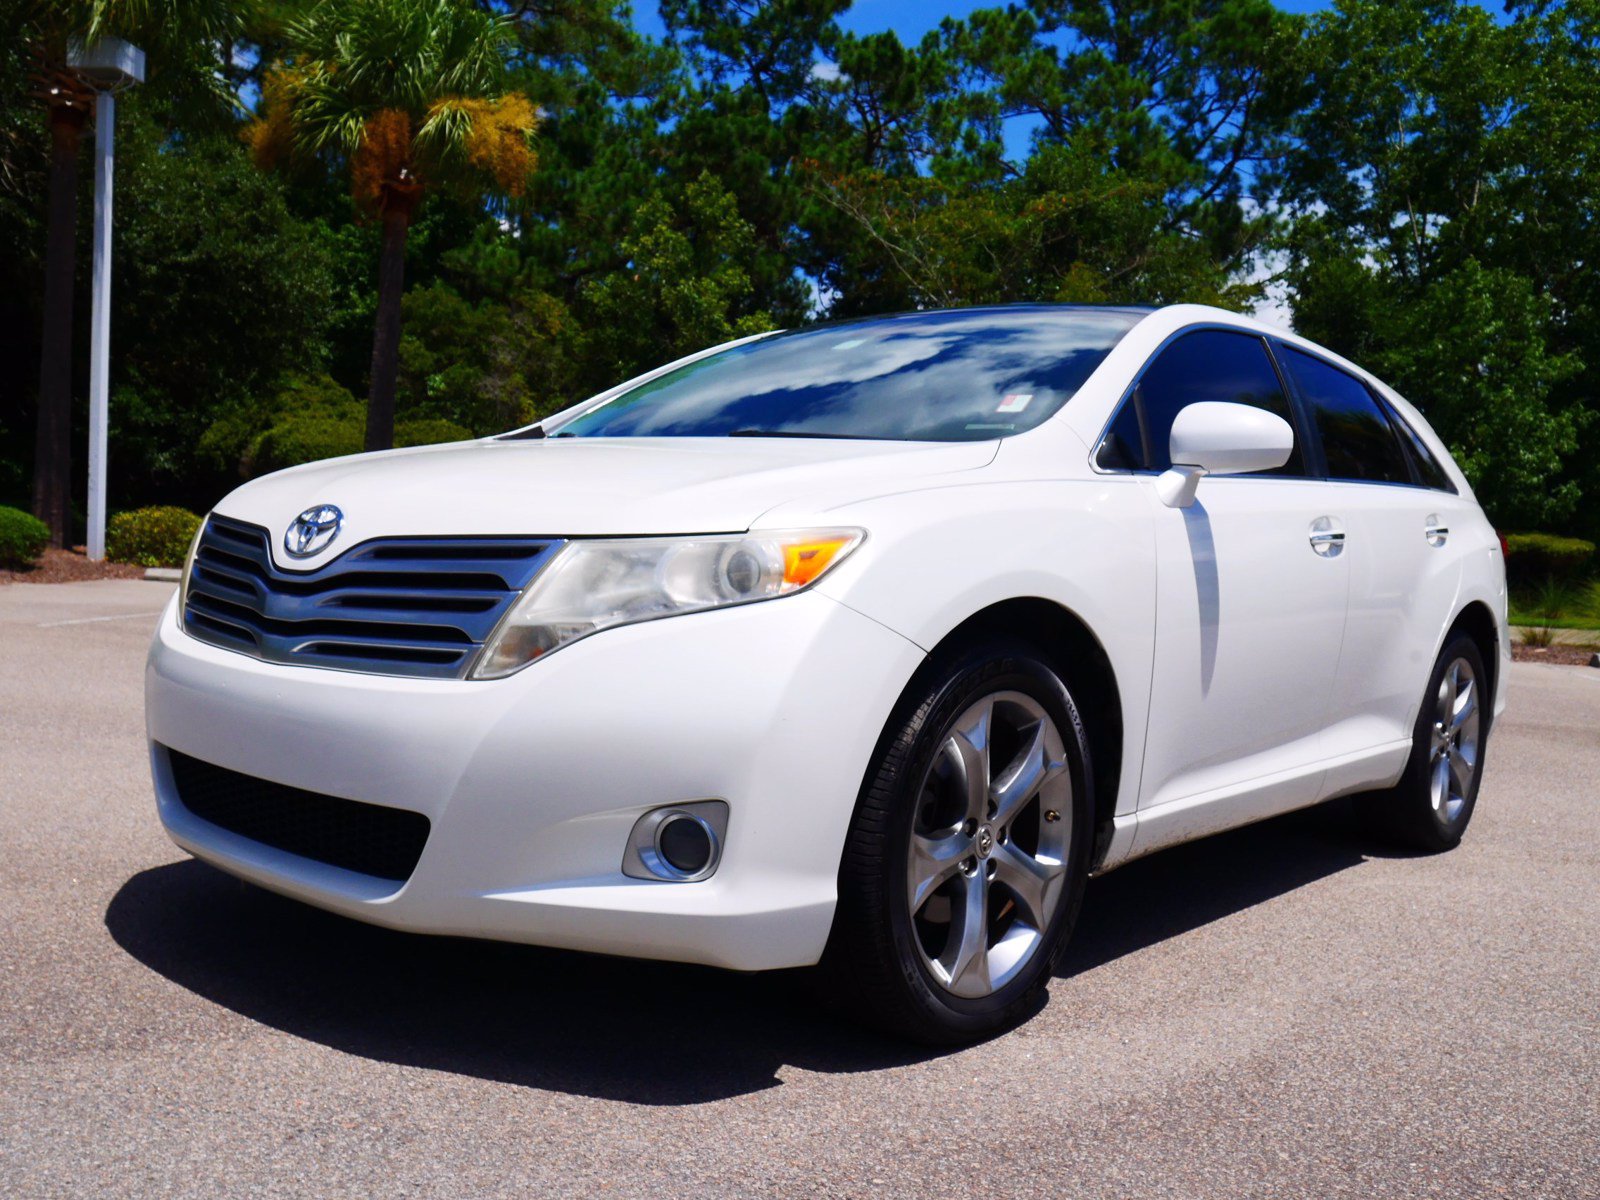 PreOwned 2010 Toyota Venza Base FWD 4D Sport Utility